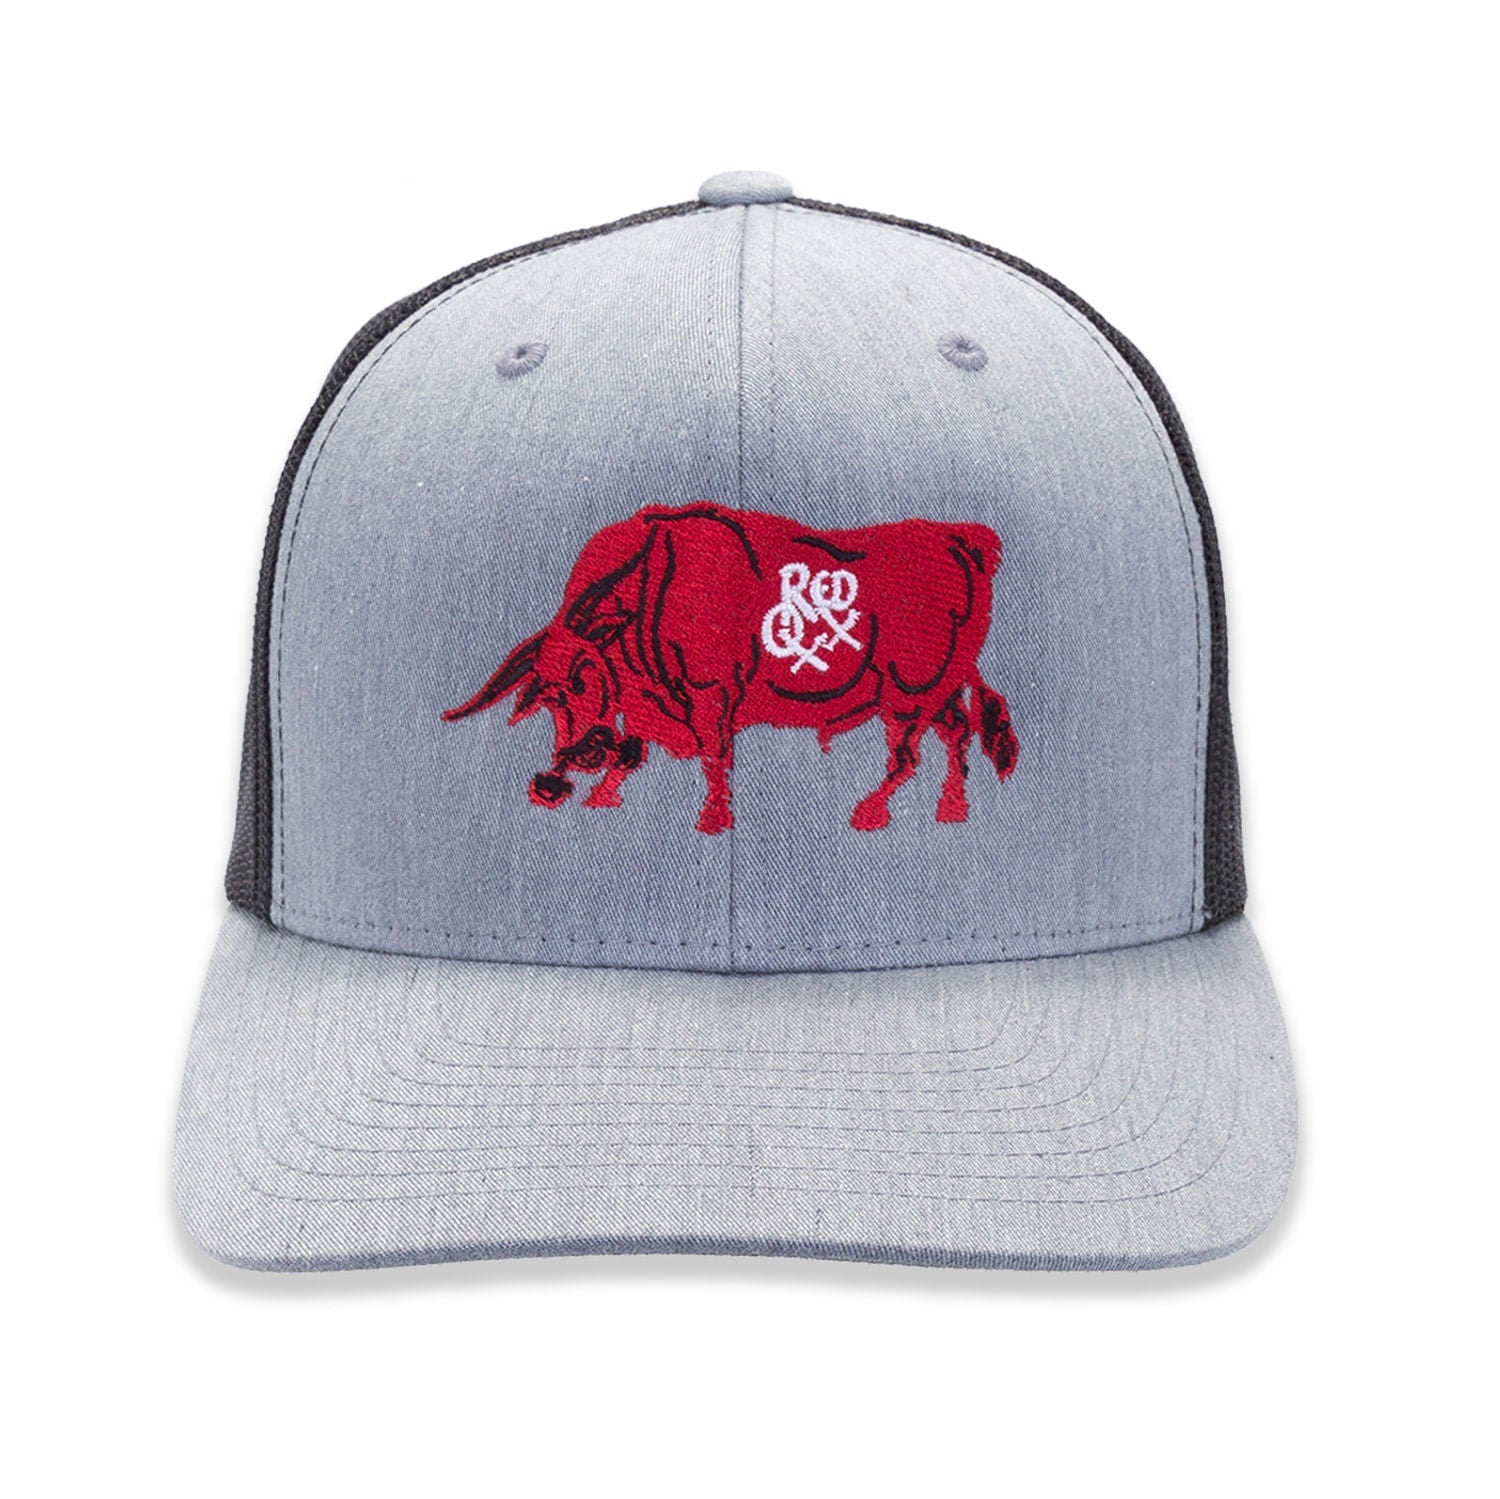 Embroidered Trucker hat with Red Oxx woodcut image. 